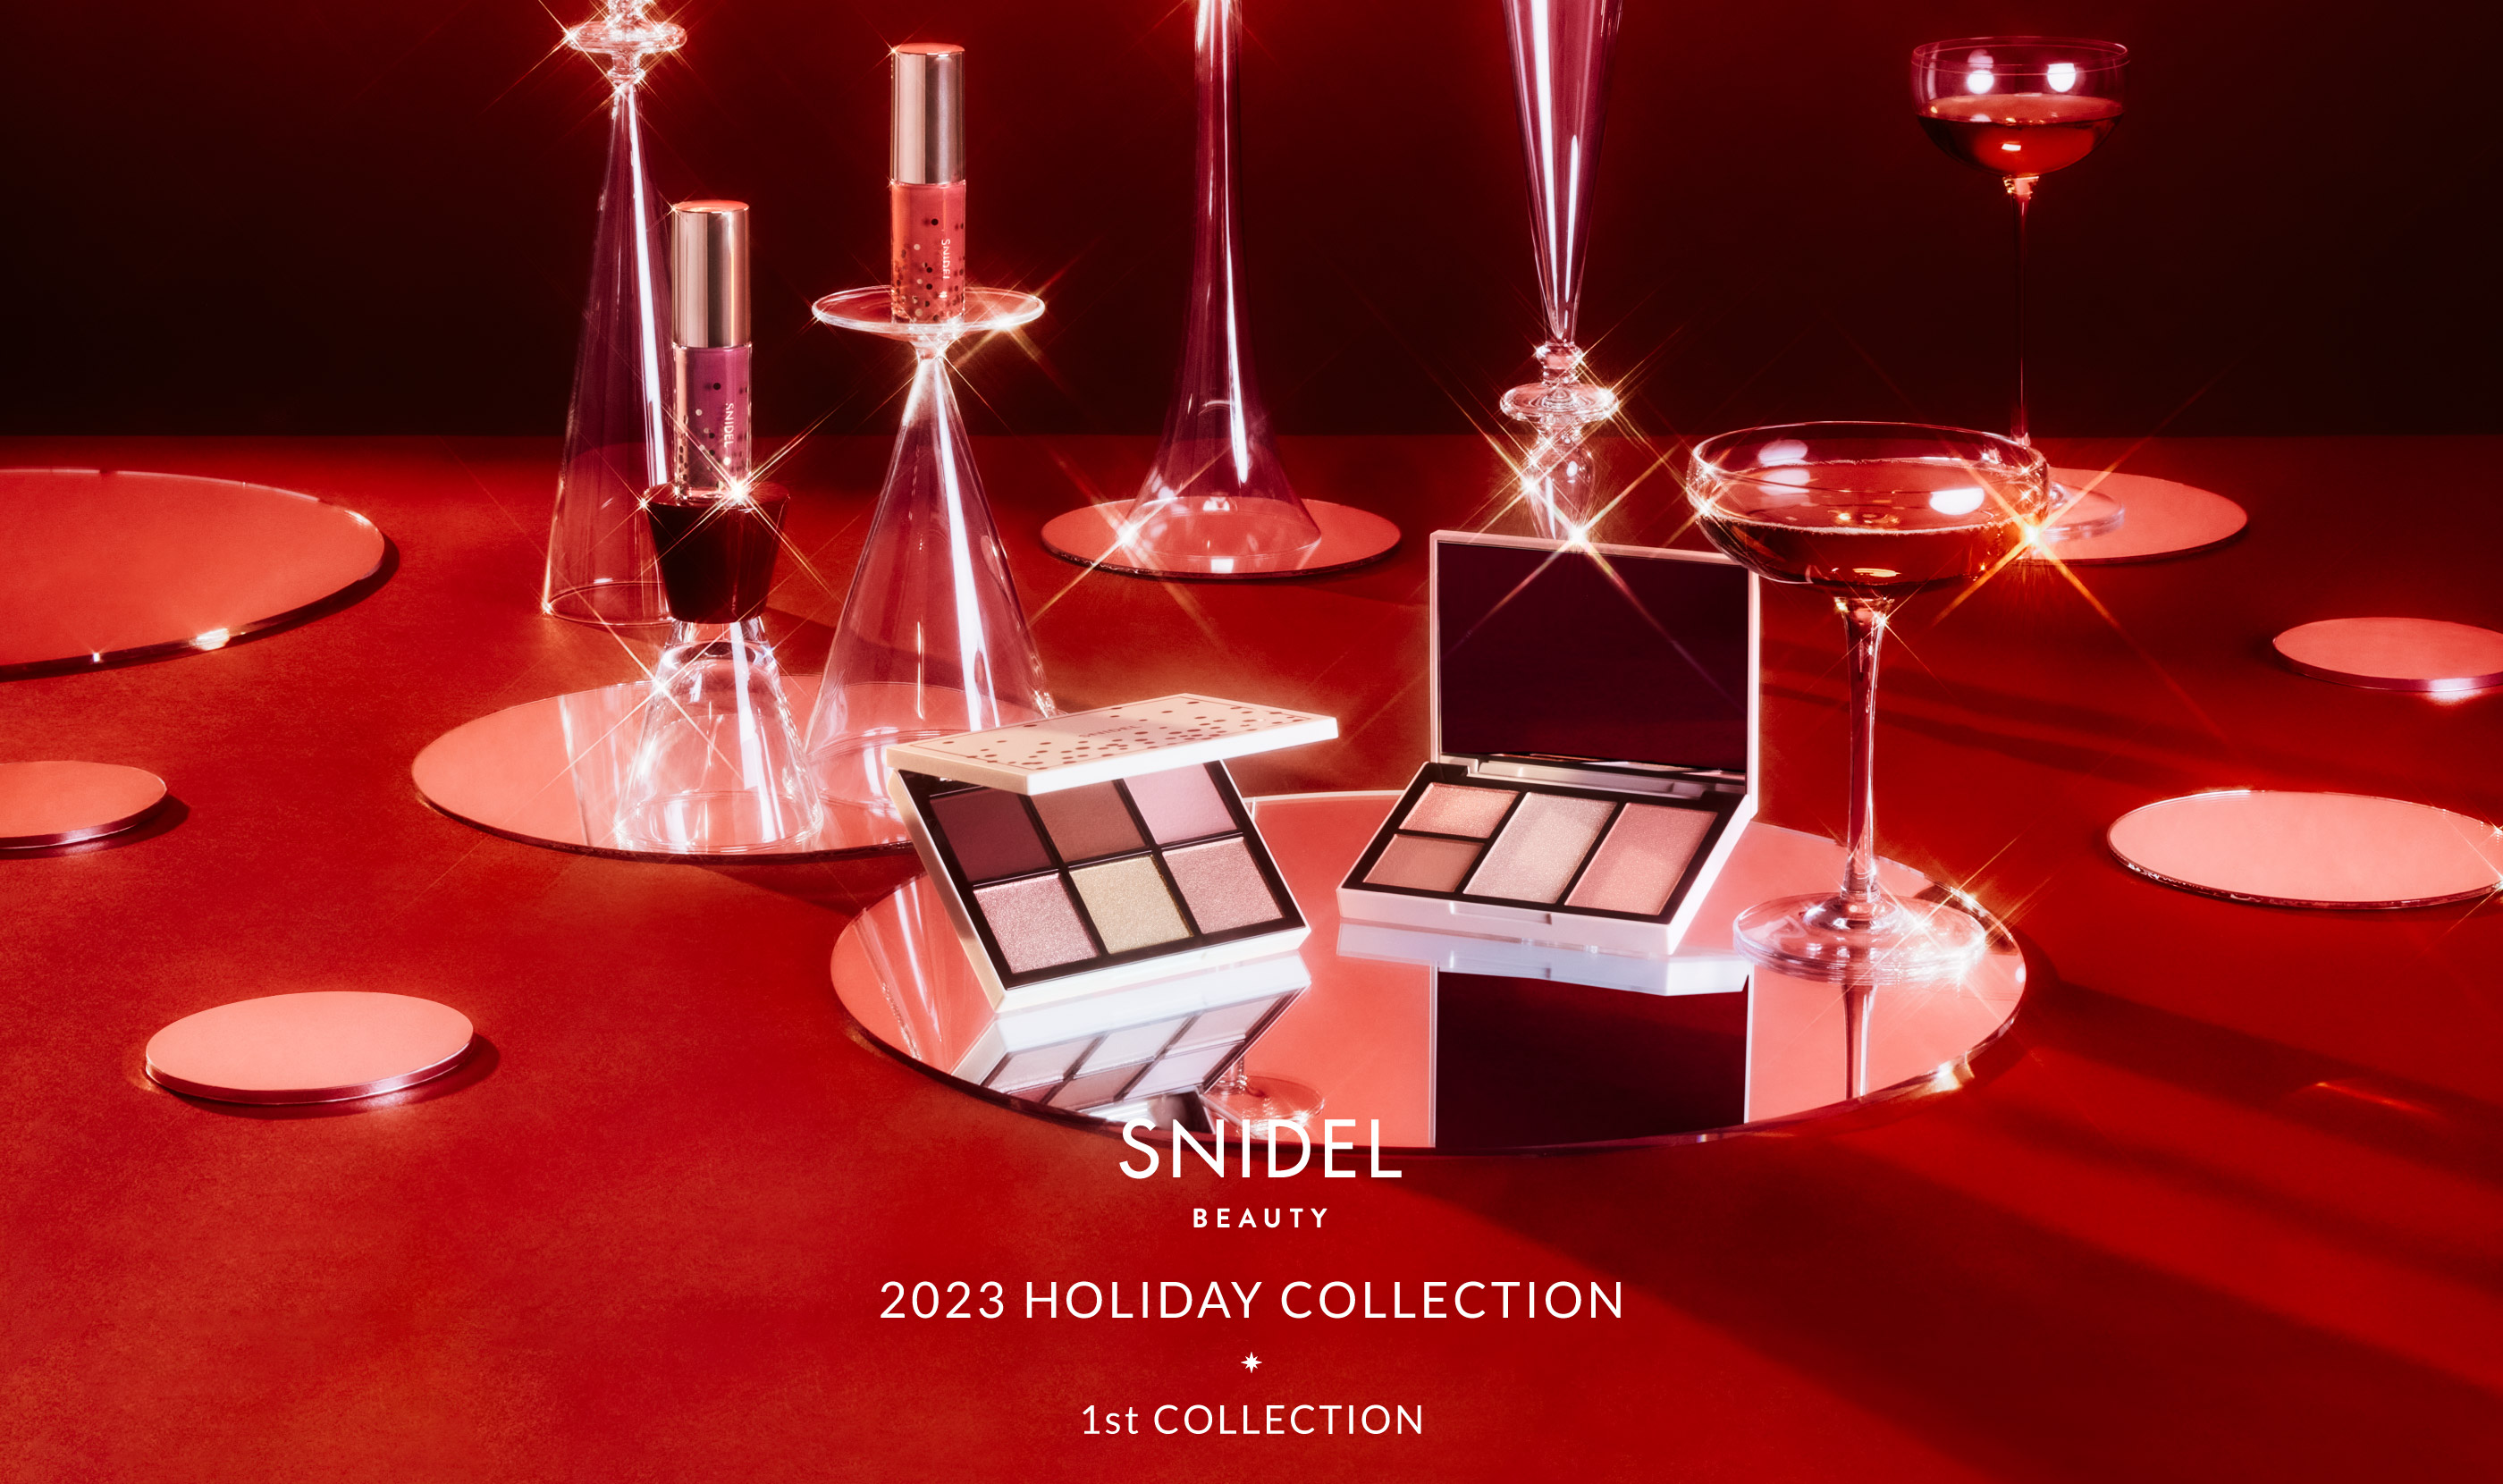 SNIDEL BEAUTY 2023 HOLIDAY COLLECTION